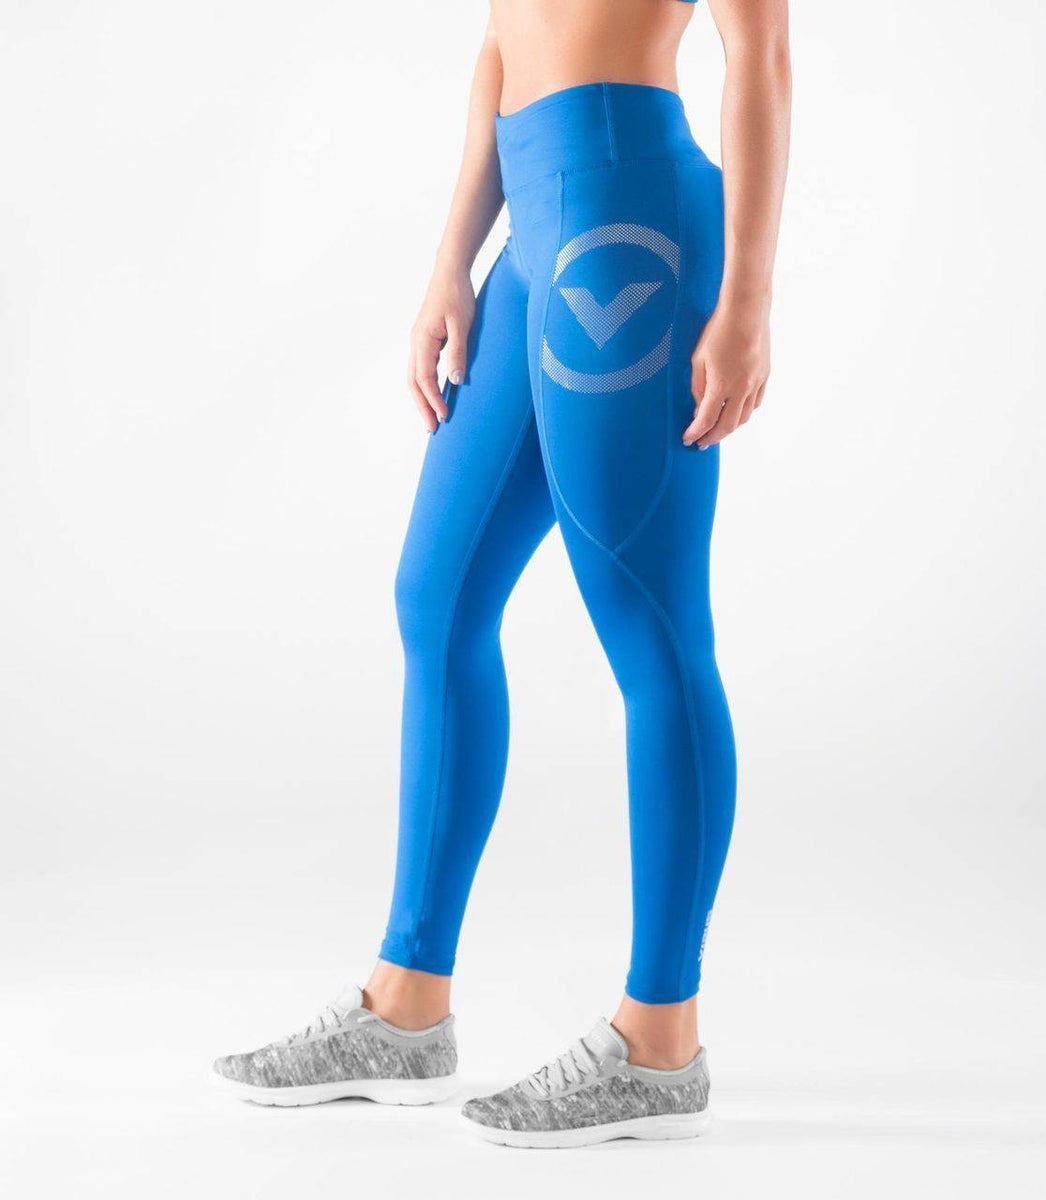 Virus | RX8.5 Stay Cool Compression Pants